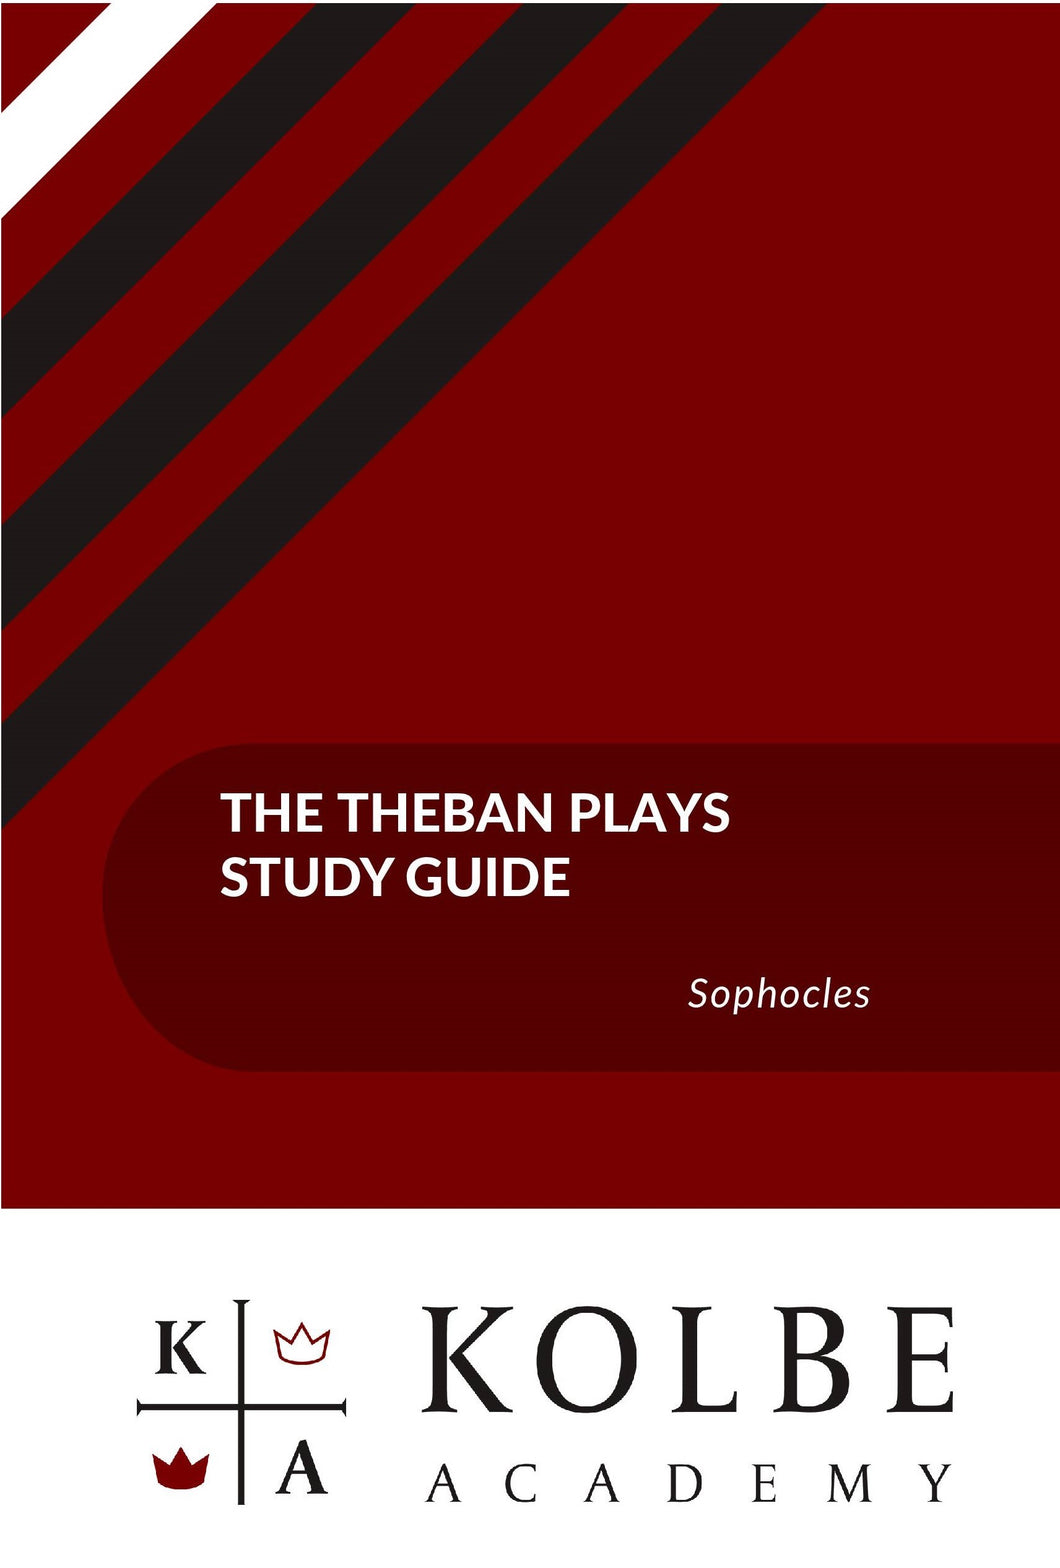 The Theban Plays Study Guide